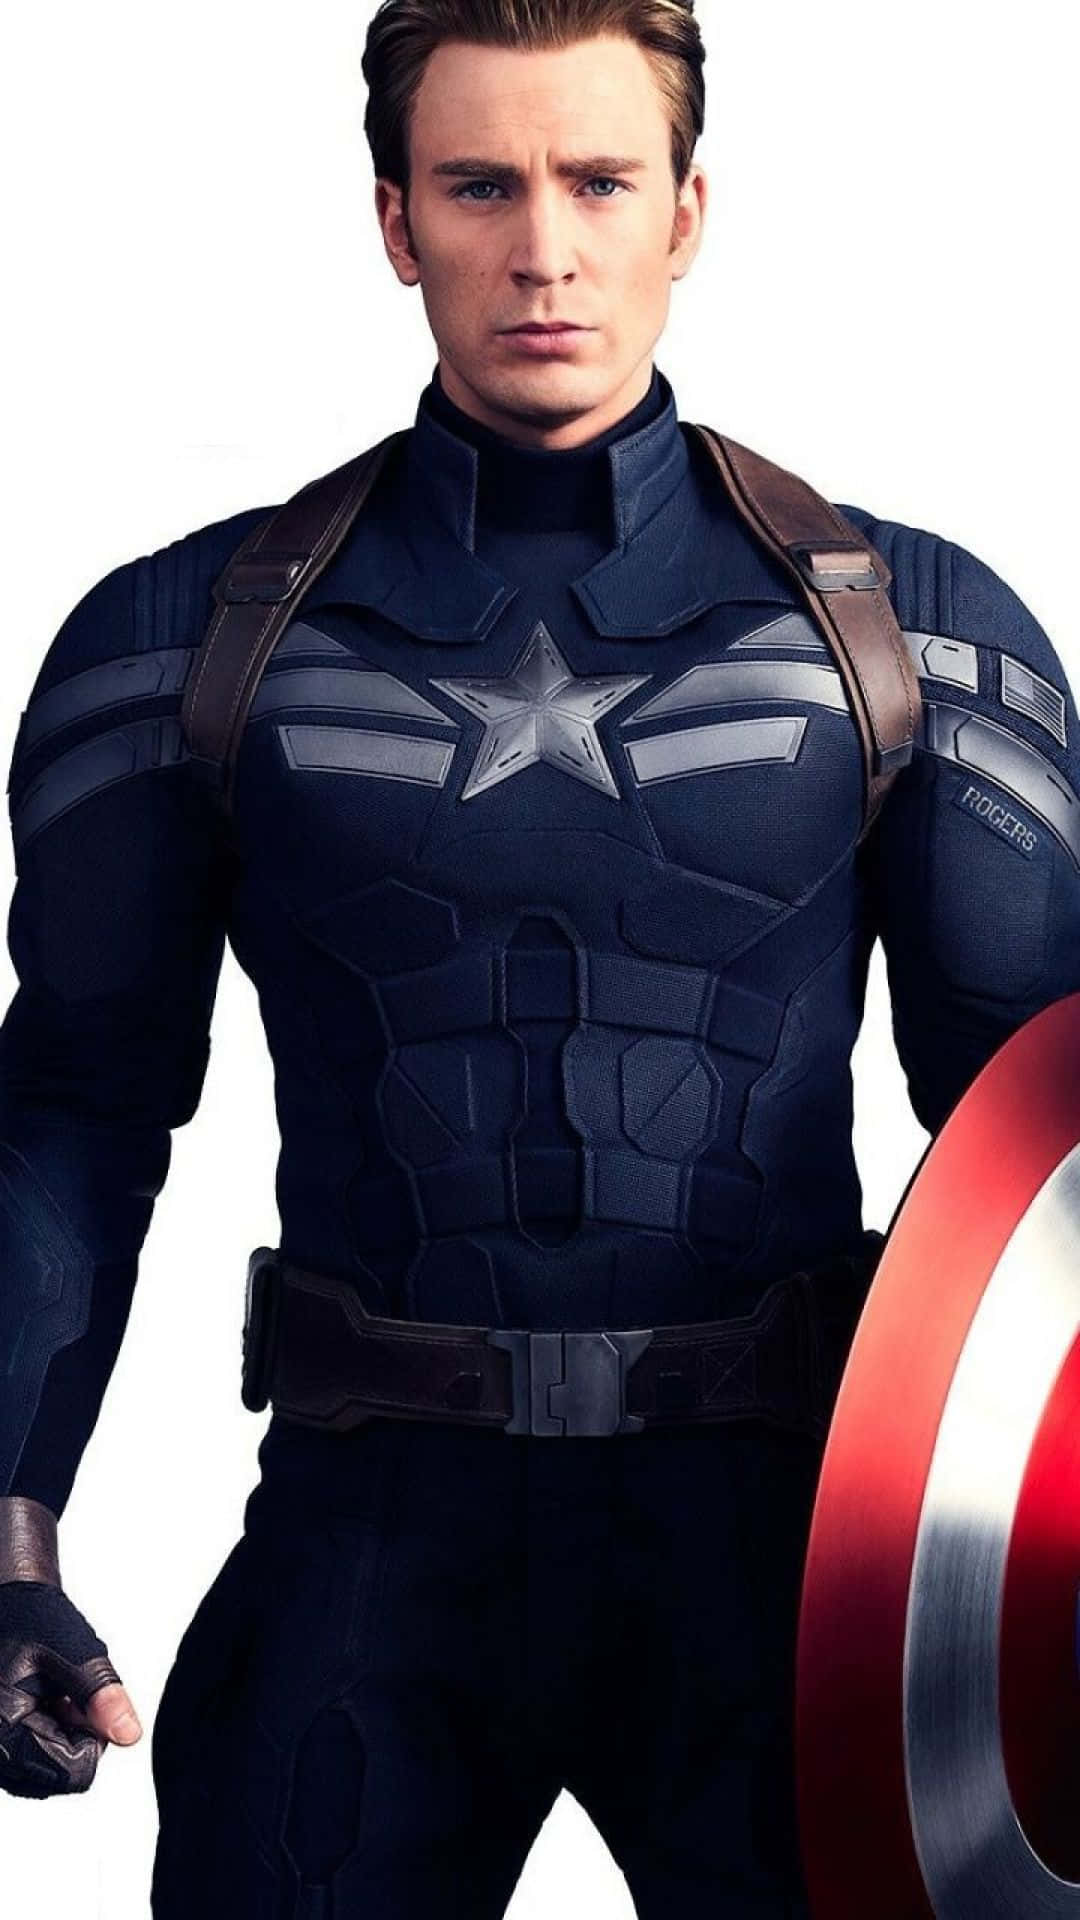 "The Ultimate Android Hero - Captain America!"